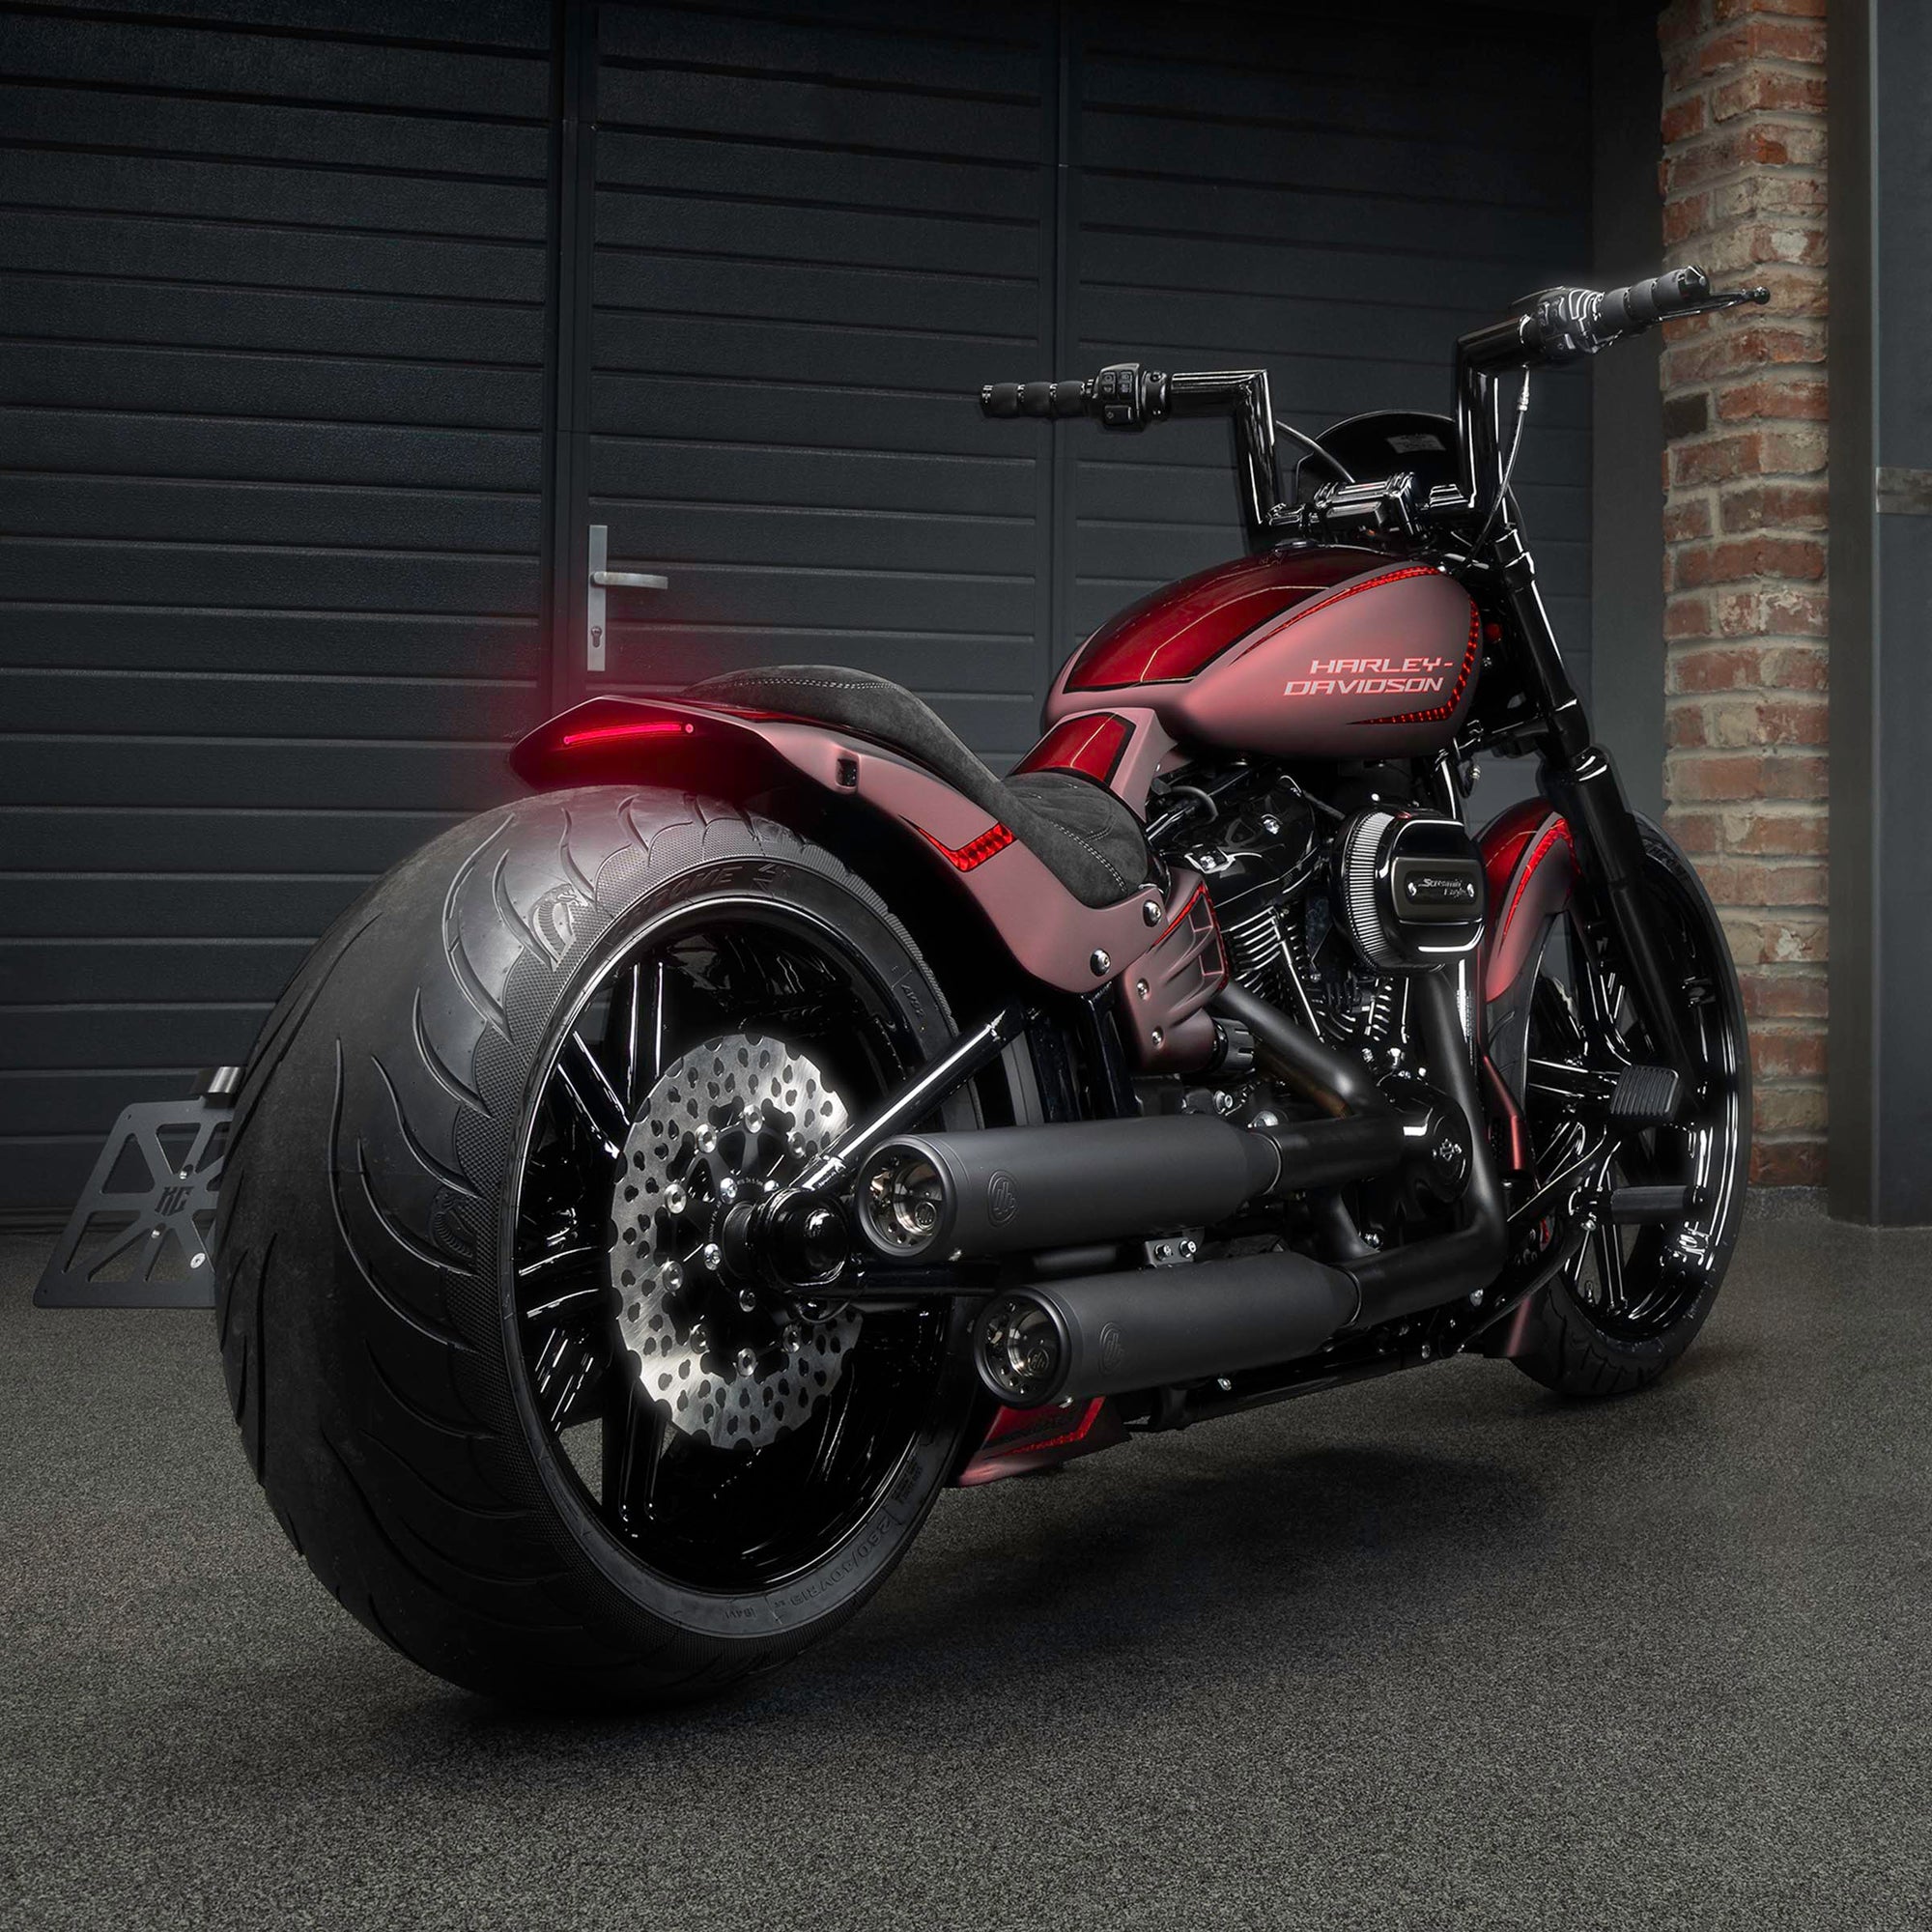 Modified Harley Davidson motorcycle Breakout with Killer Custom parts from the rear in a modern garage